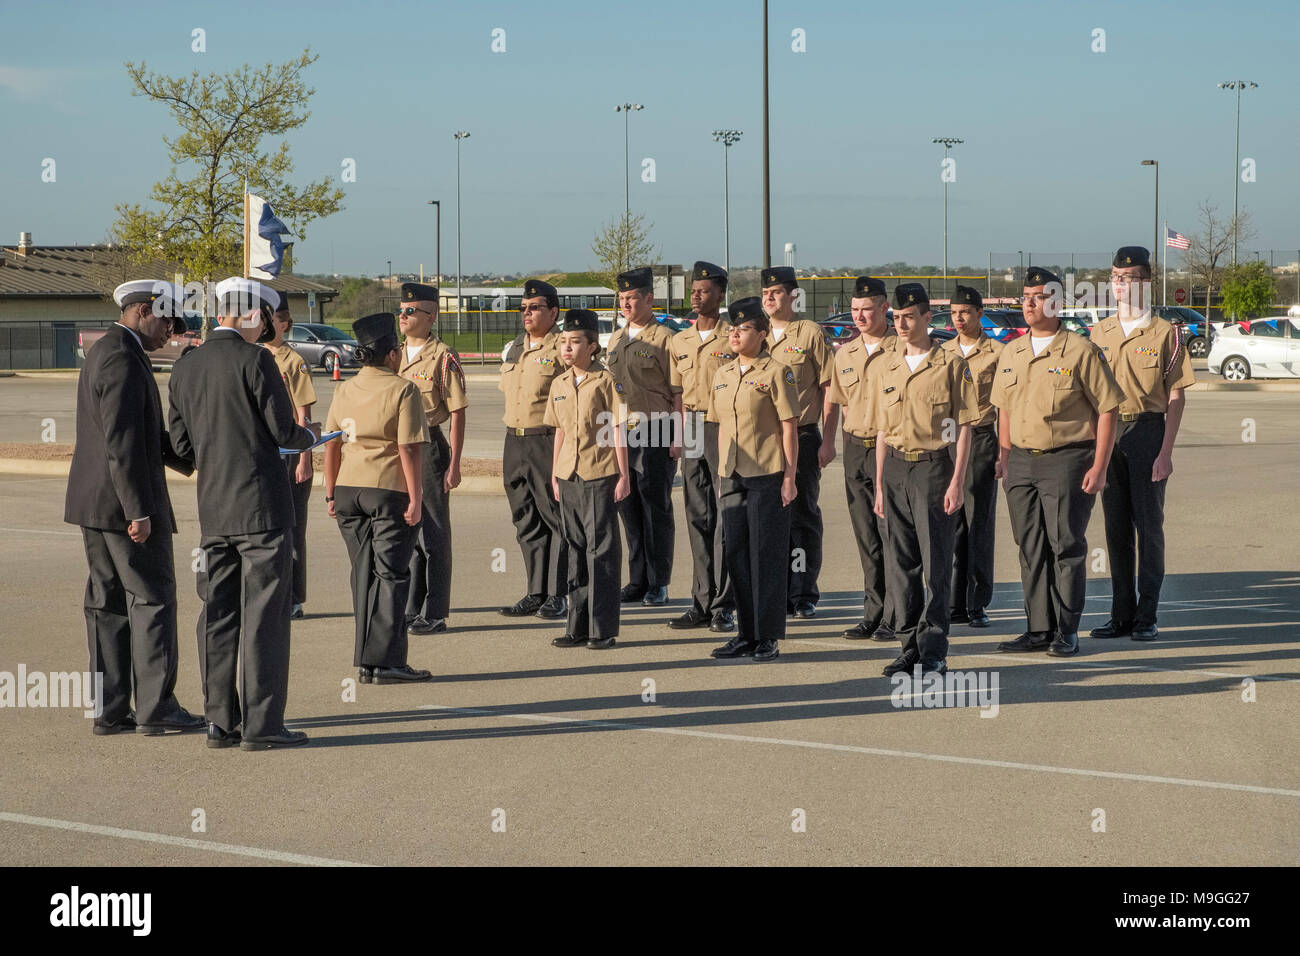 US Navy NJROTC high school cadets in marching drill formation during formal inspections Stock Photo